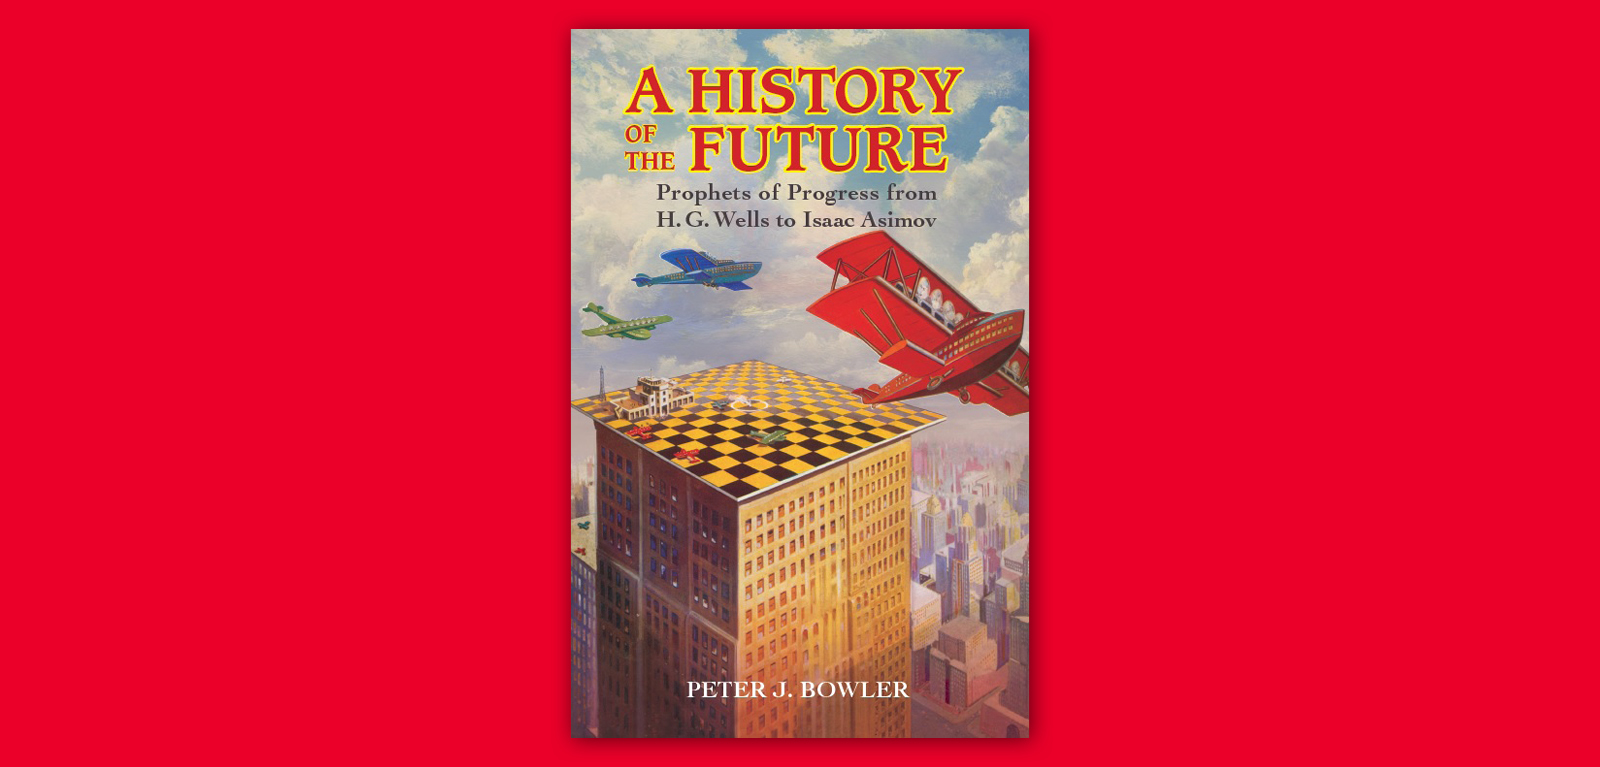 History of the future - Peter Bowler 